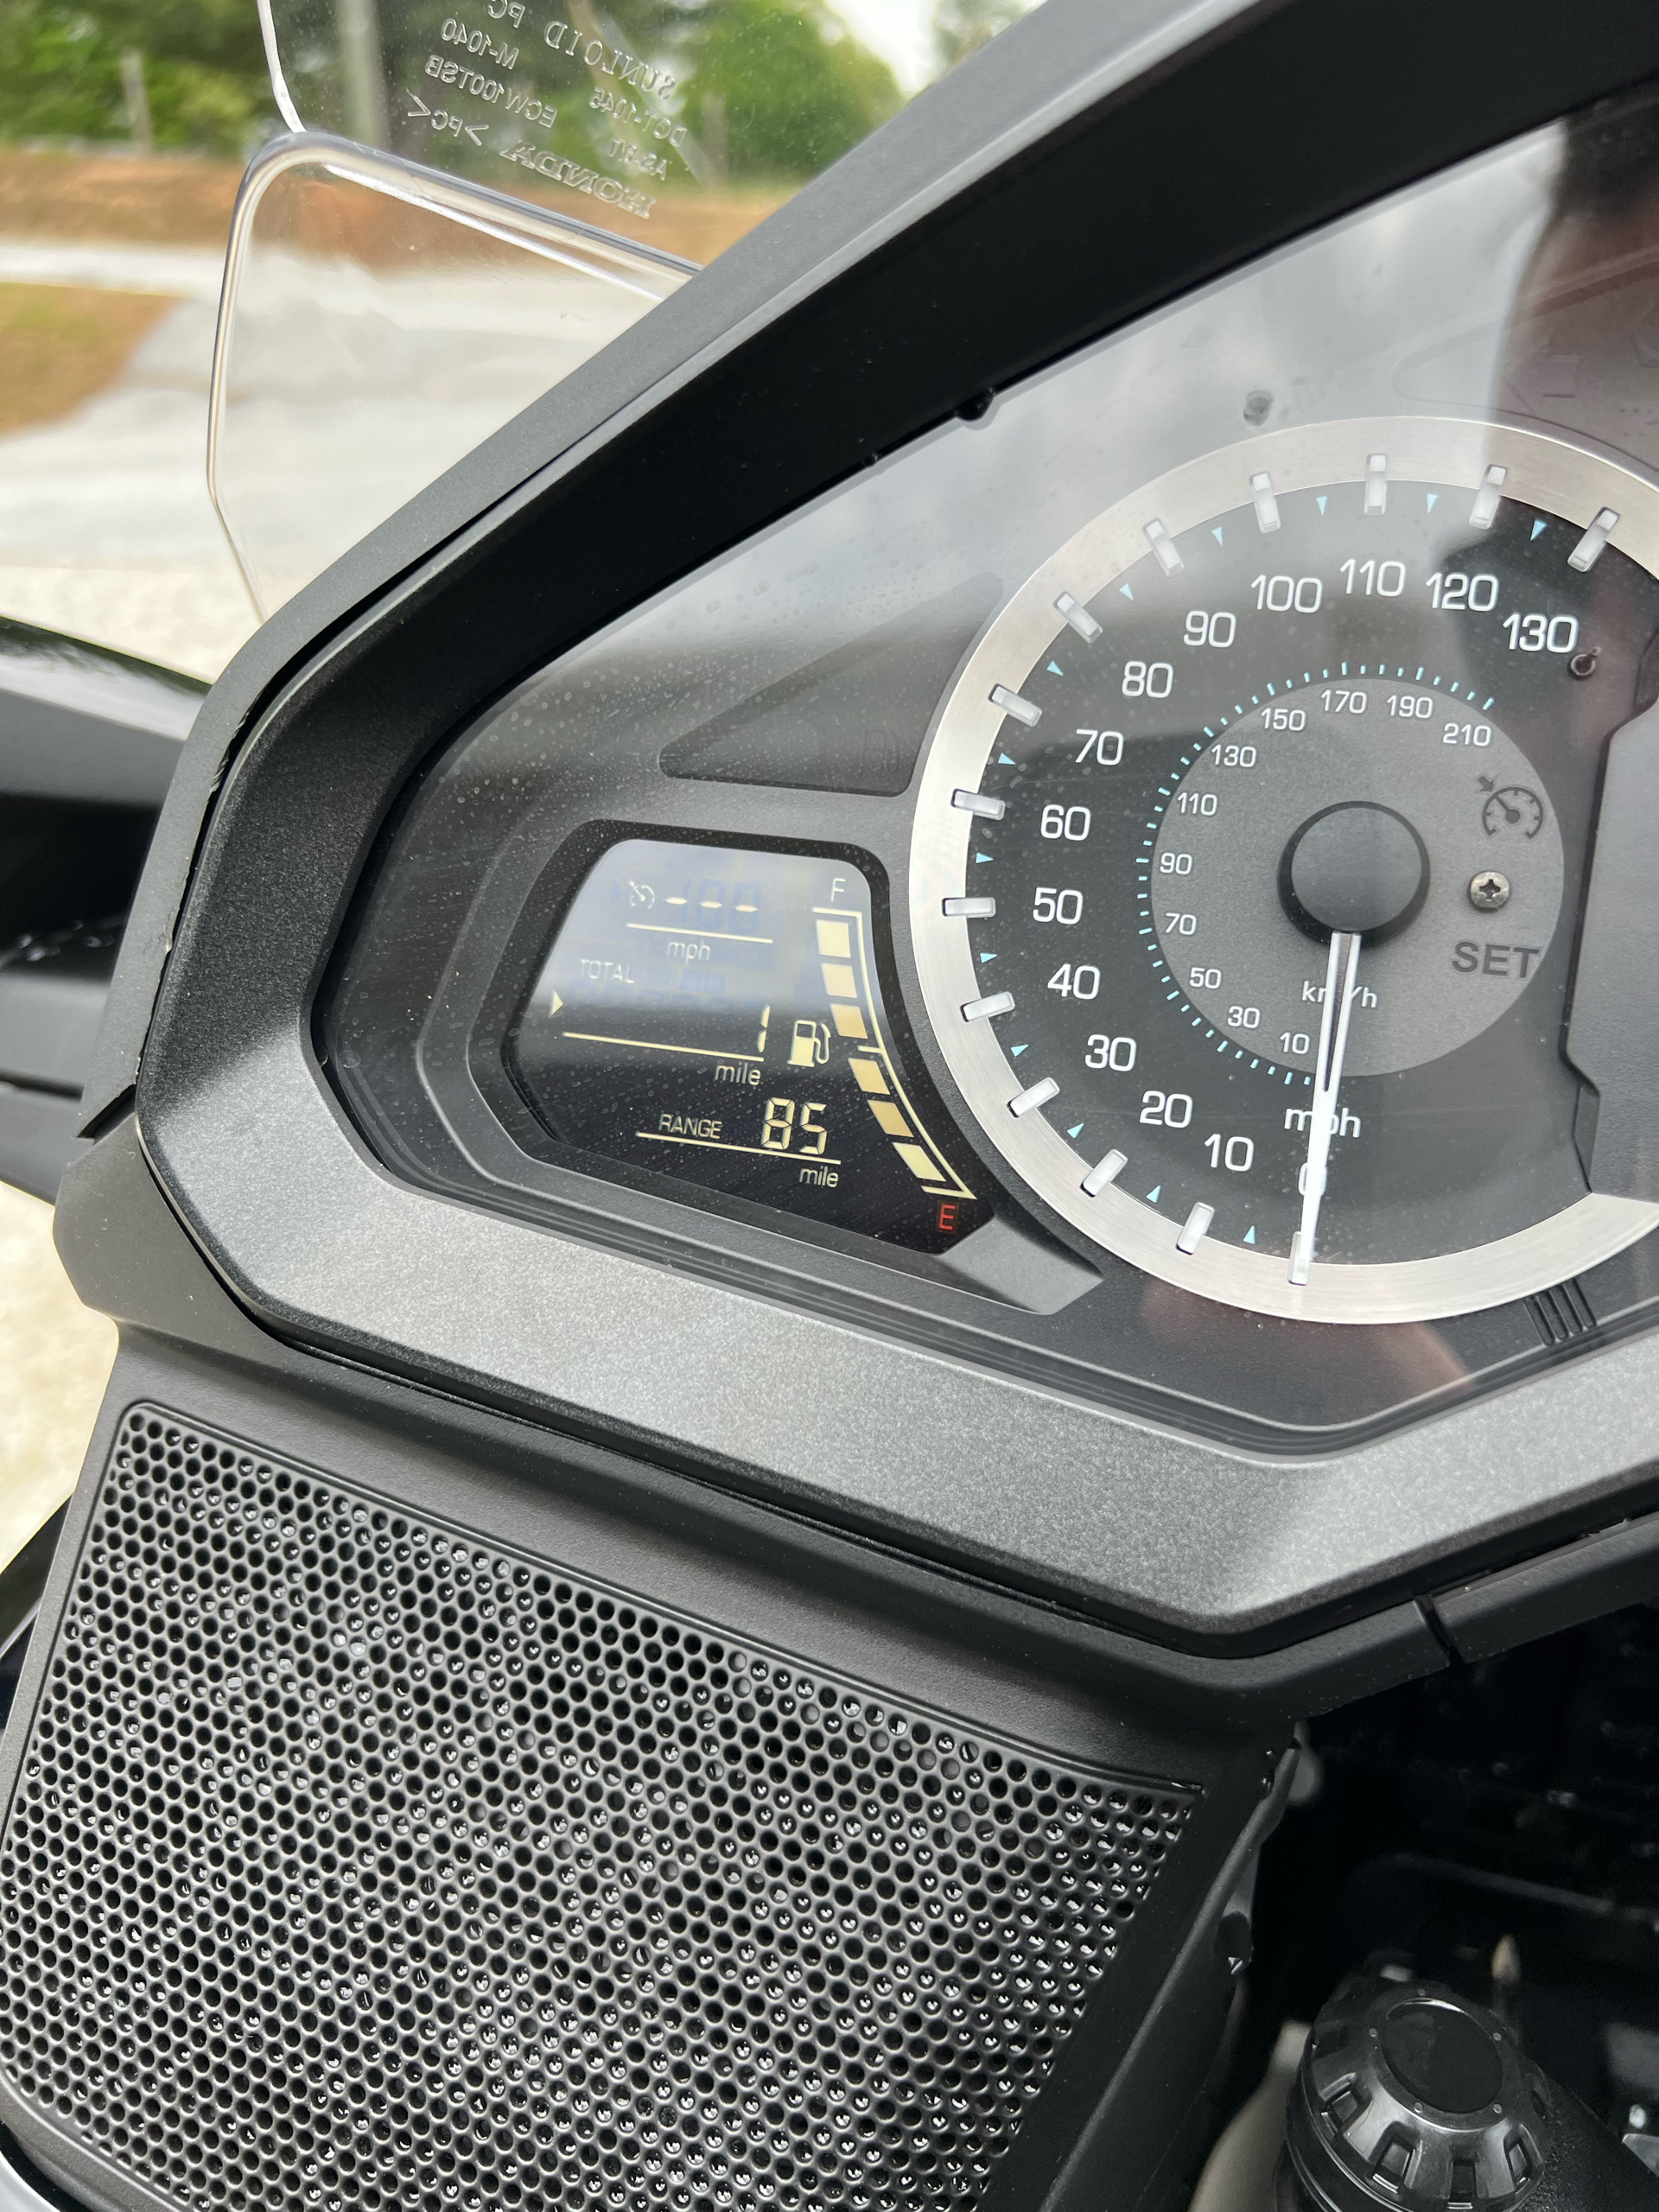 2023 Honda Gold Wing Tour Automatic DCT in Hendersonville, North Carolina - Photo 9